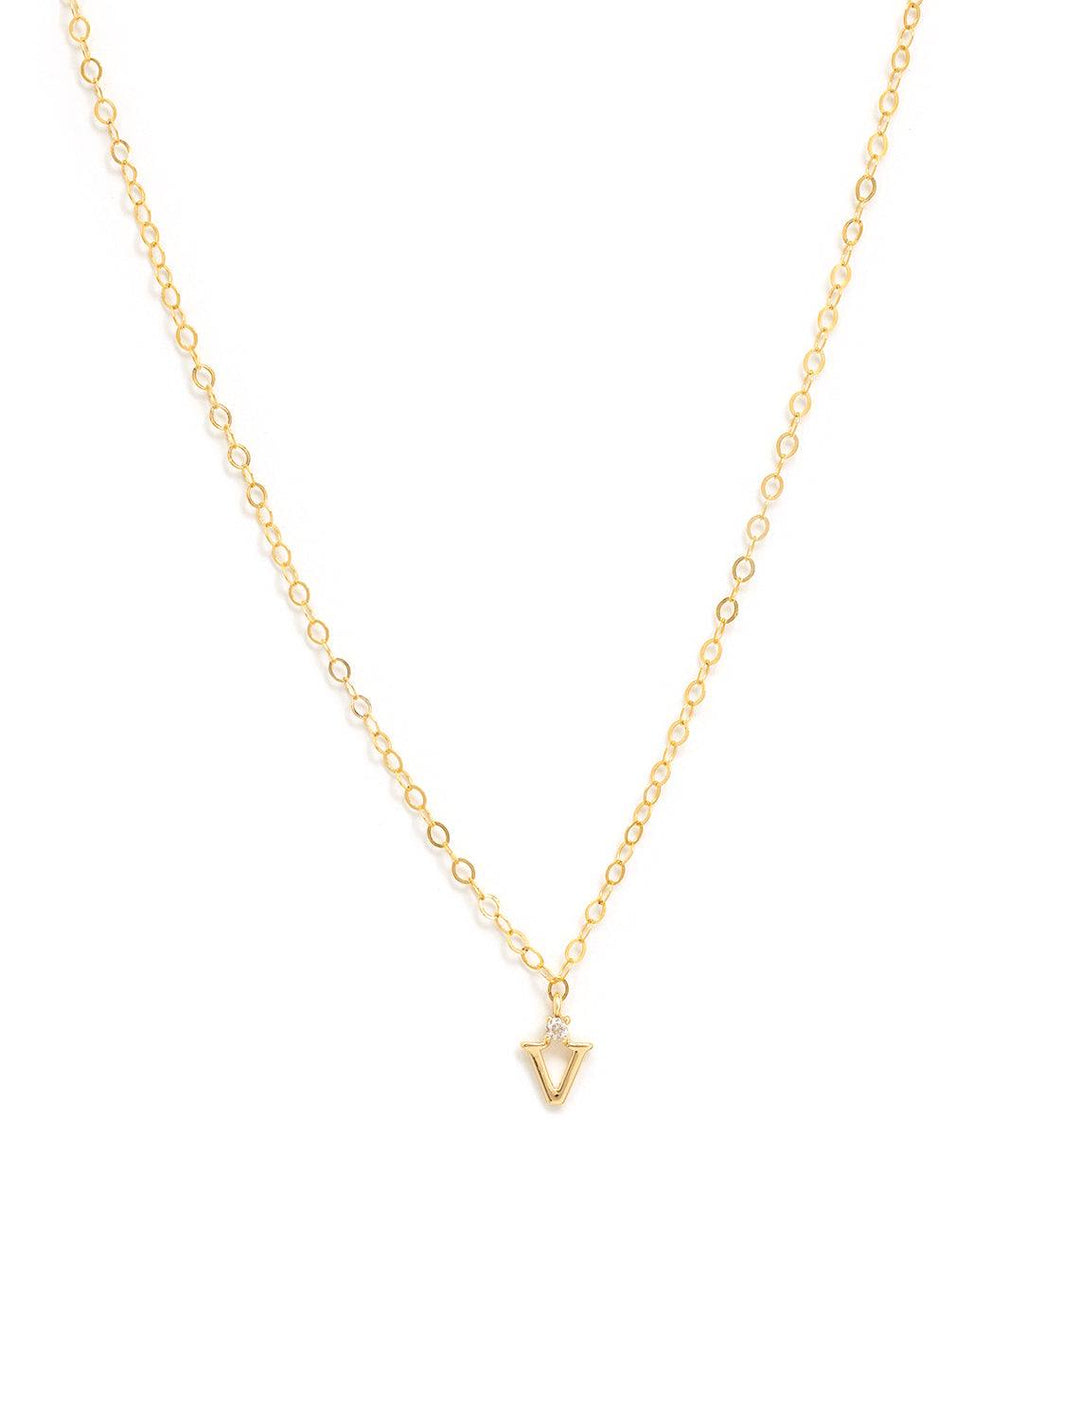 Marit Rae initial and cz necklace in gold | V - Twigs